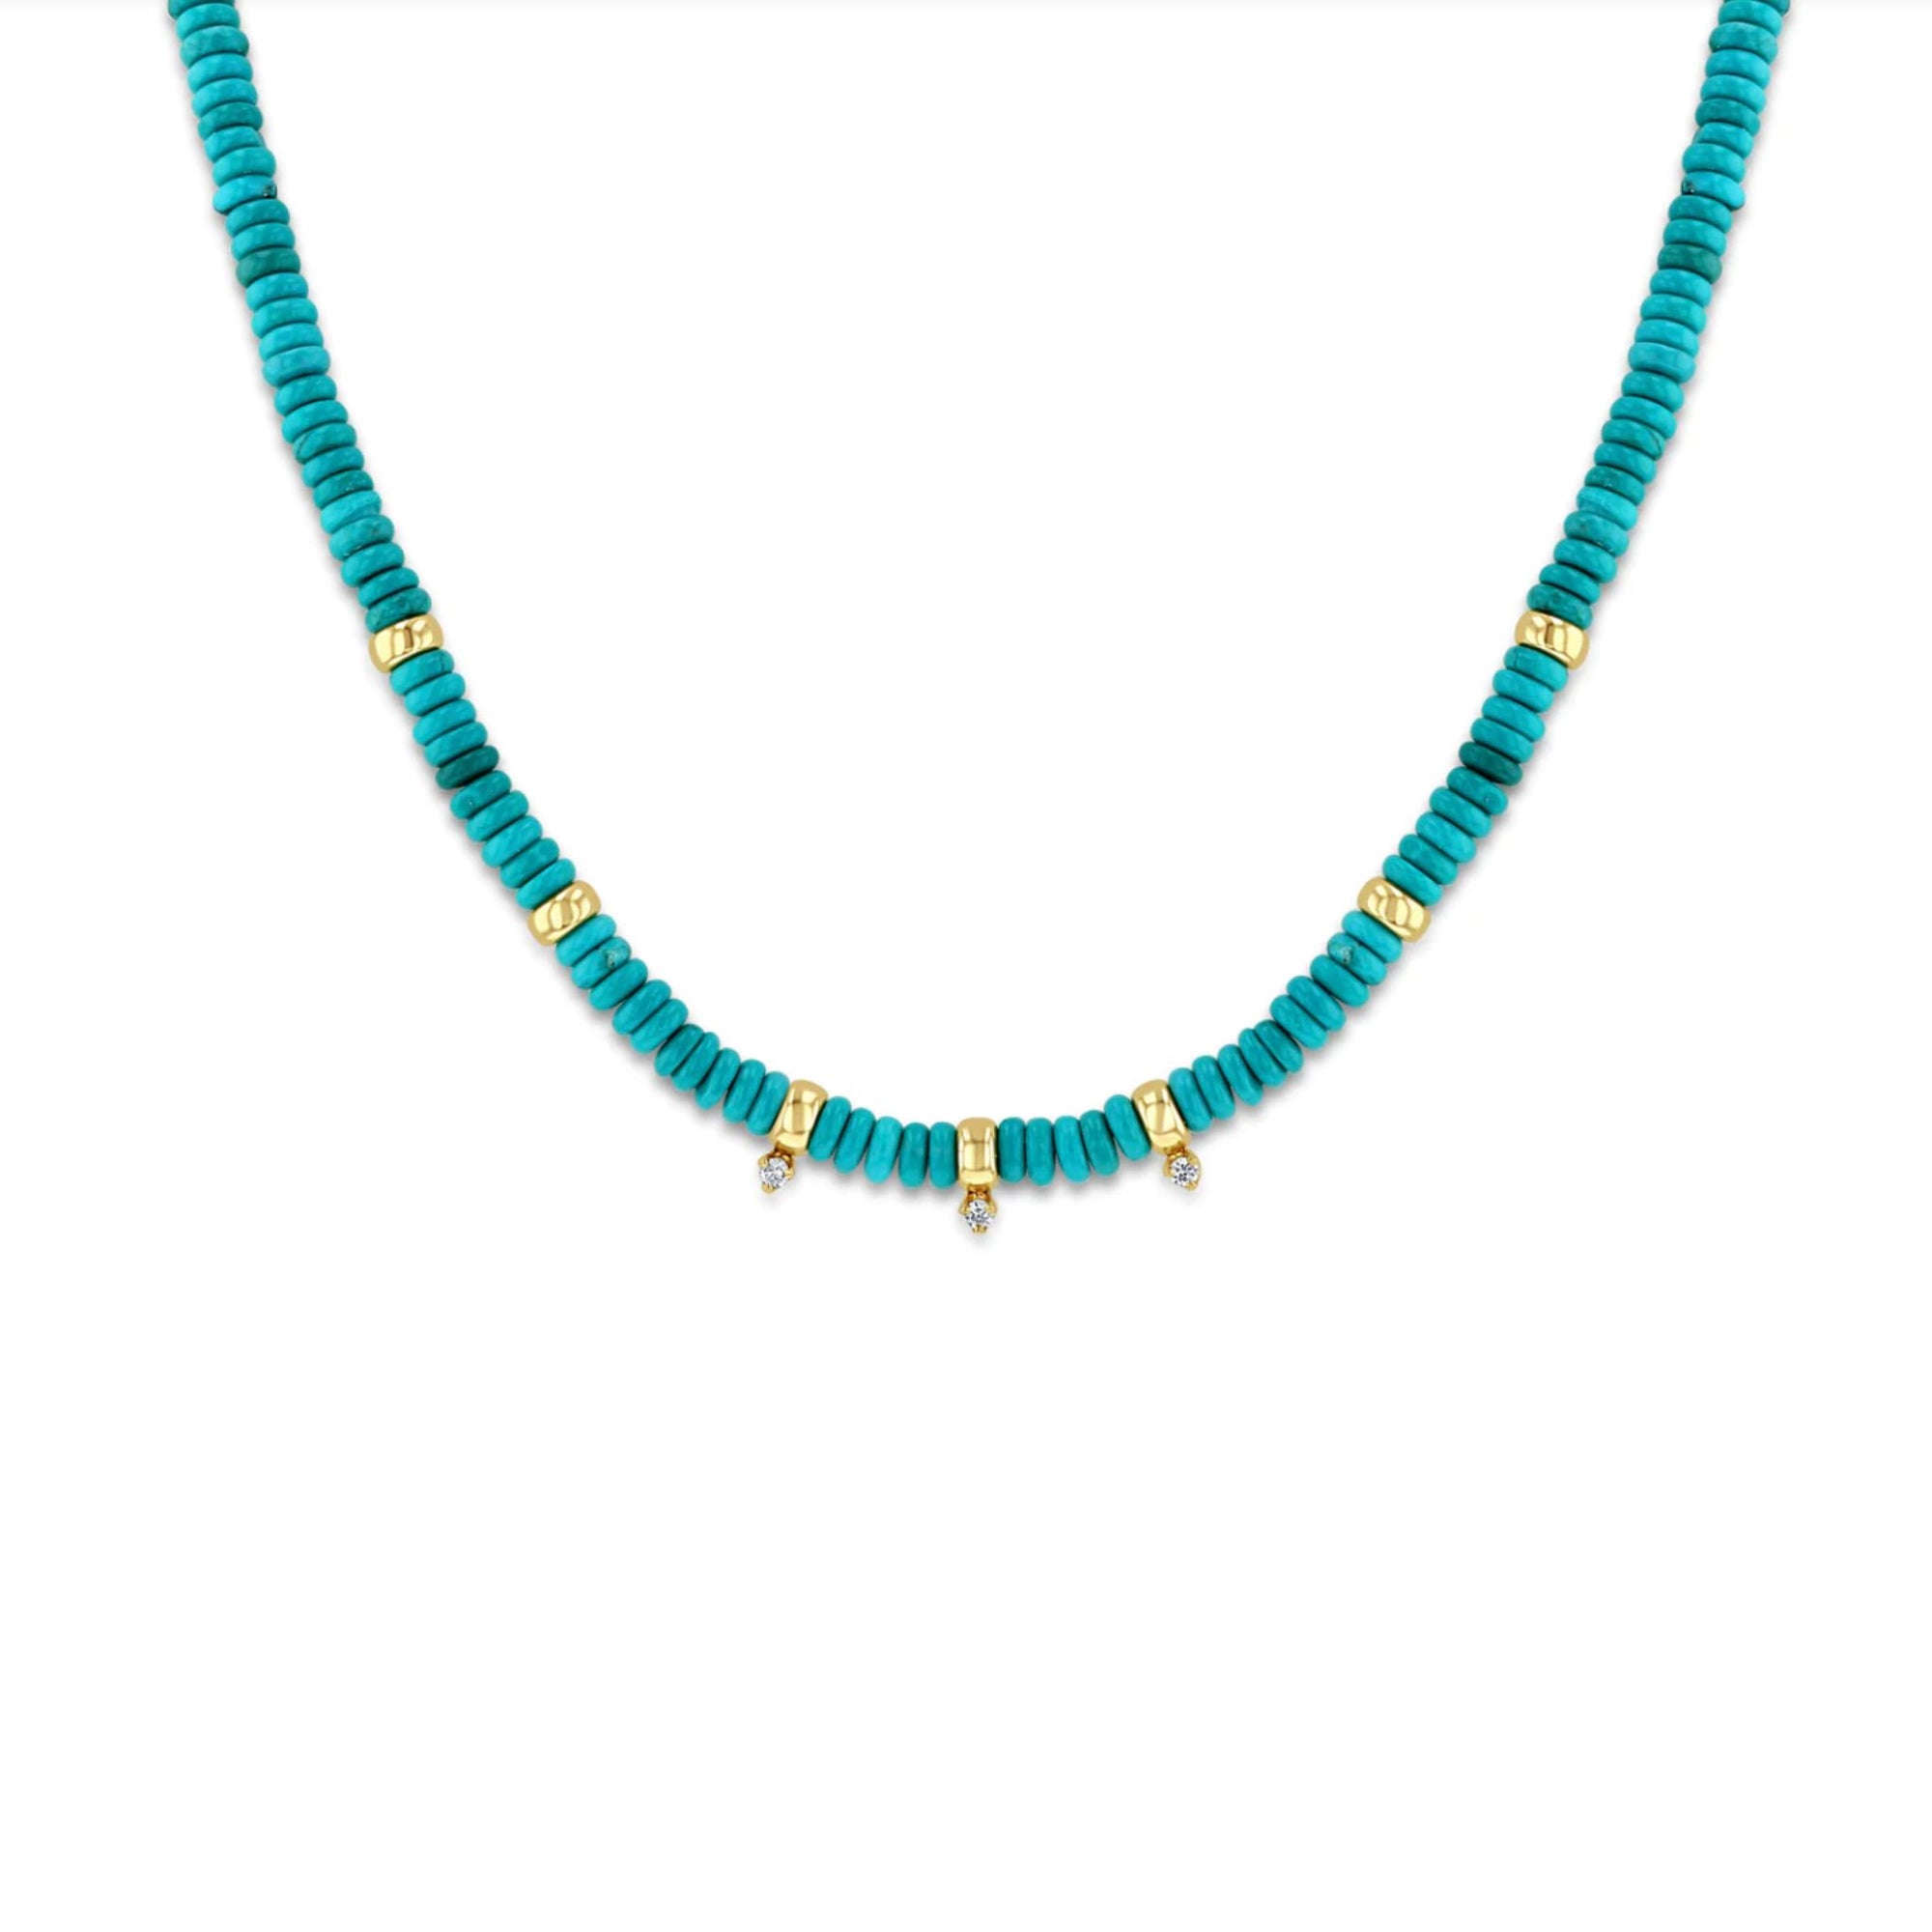 Zoe Chicco 14k Gold and Turquoise Rondelle Bead Necklace with 3 Prong Diamonds